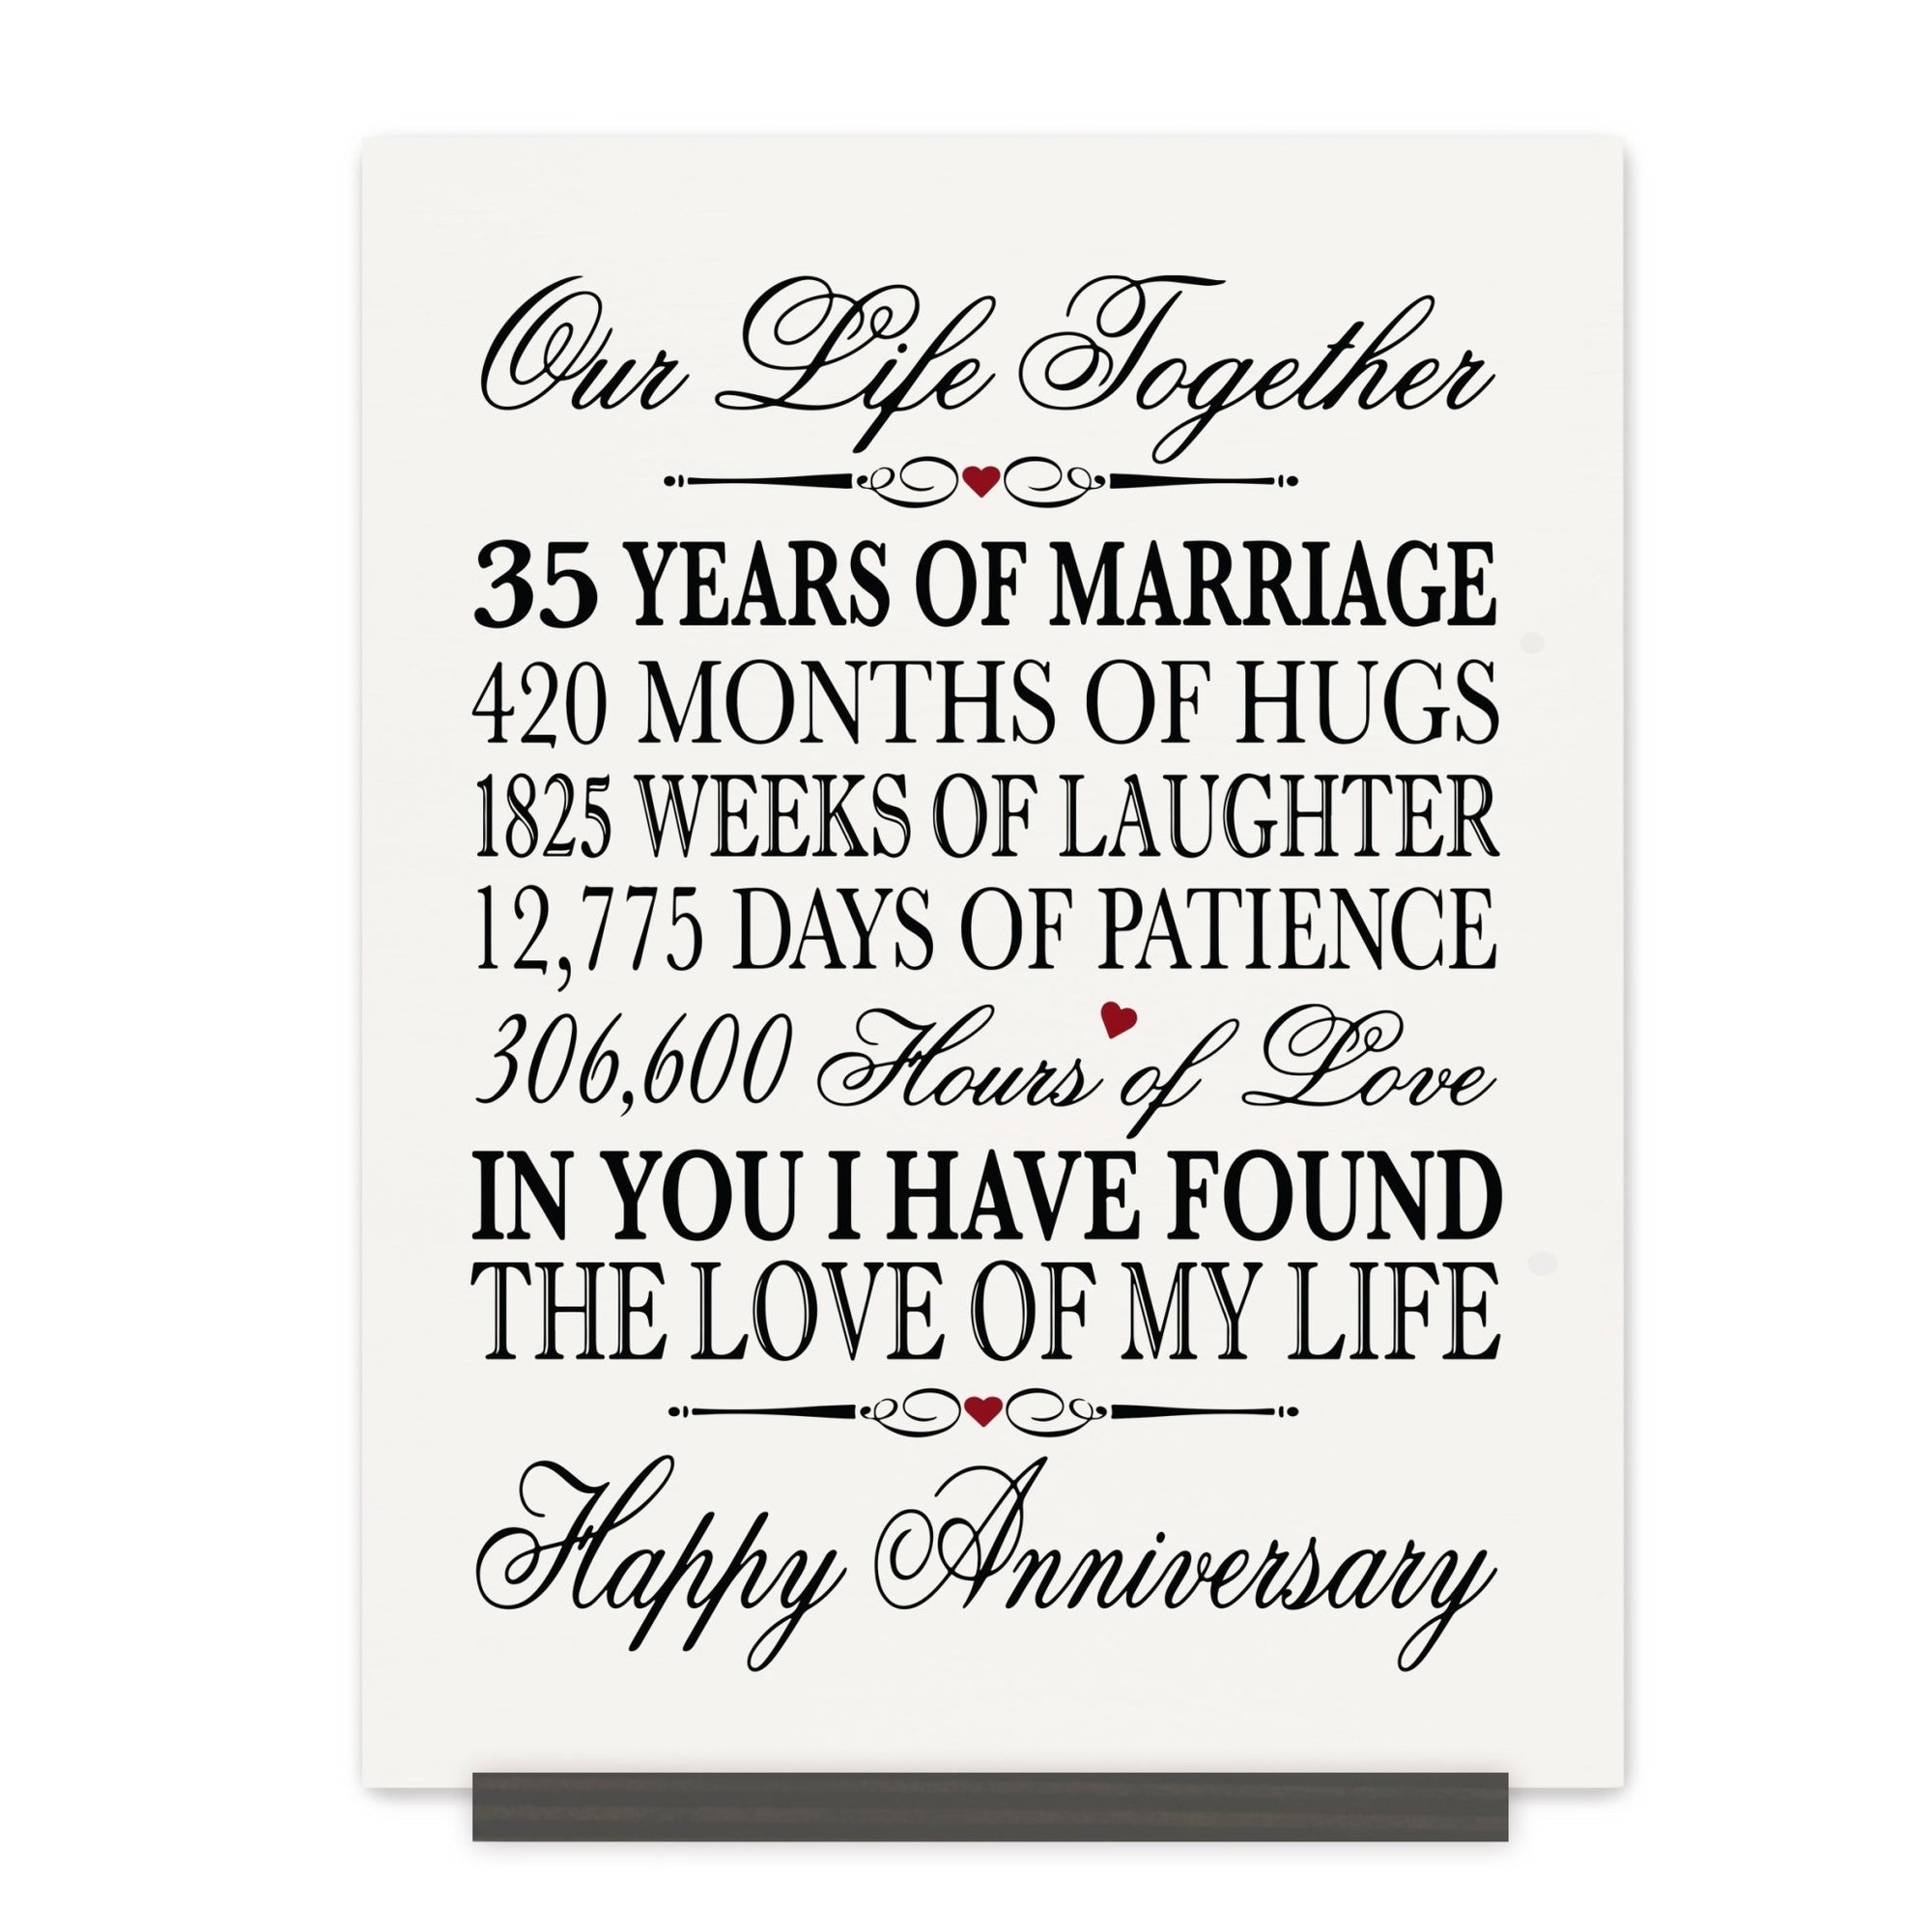 35th Wedding Anniversary Wall Plaque - Our Life Together - LifeSong Milestones